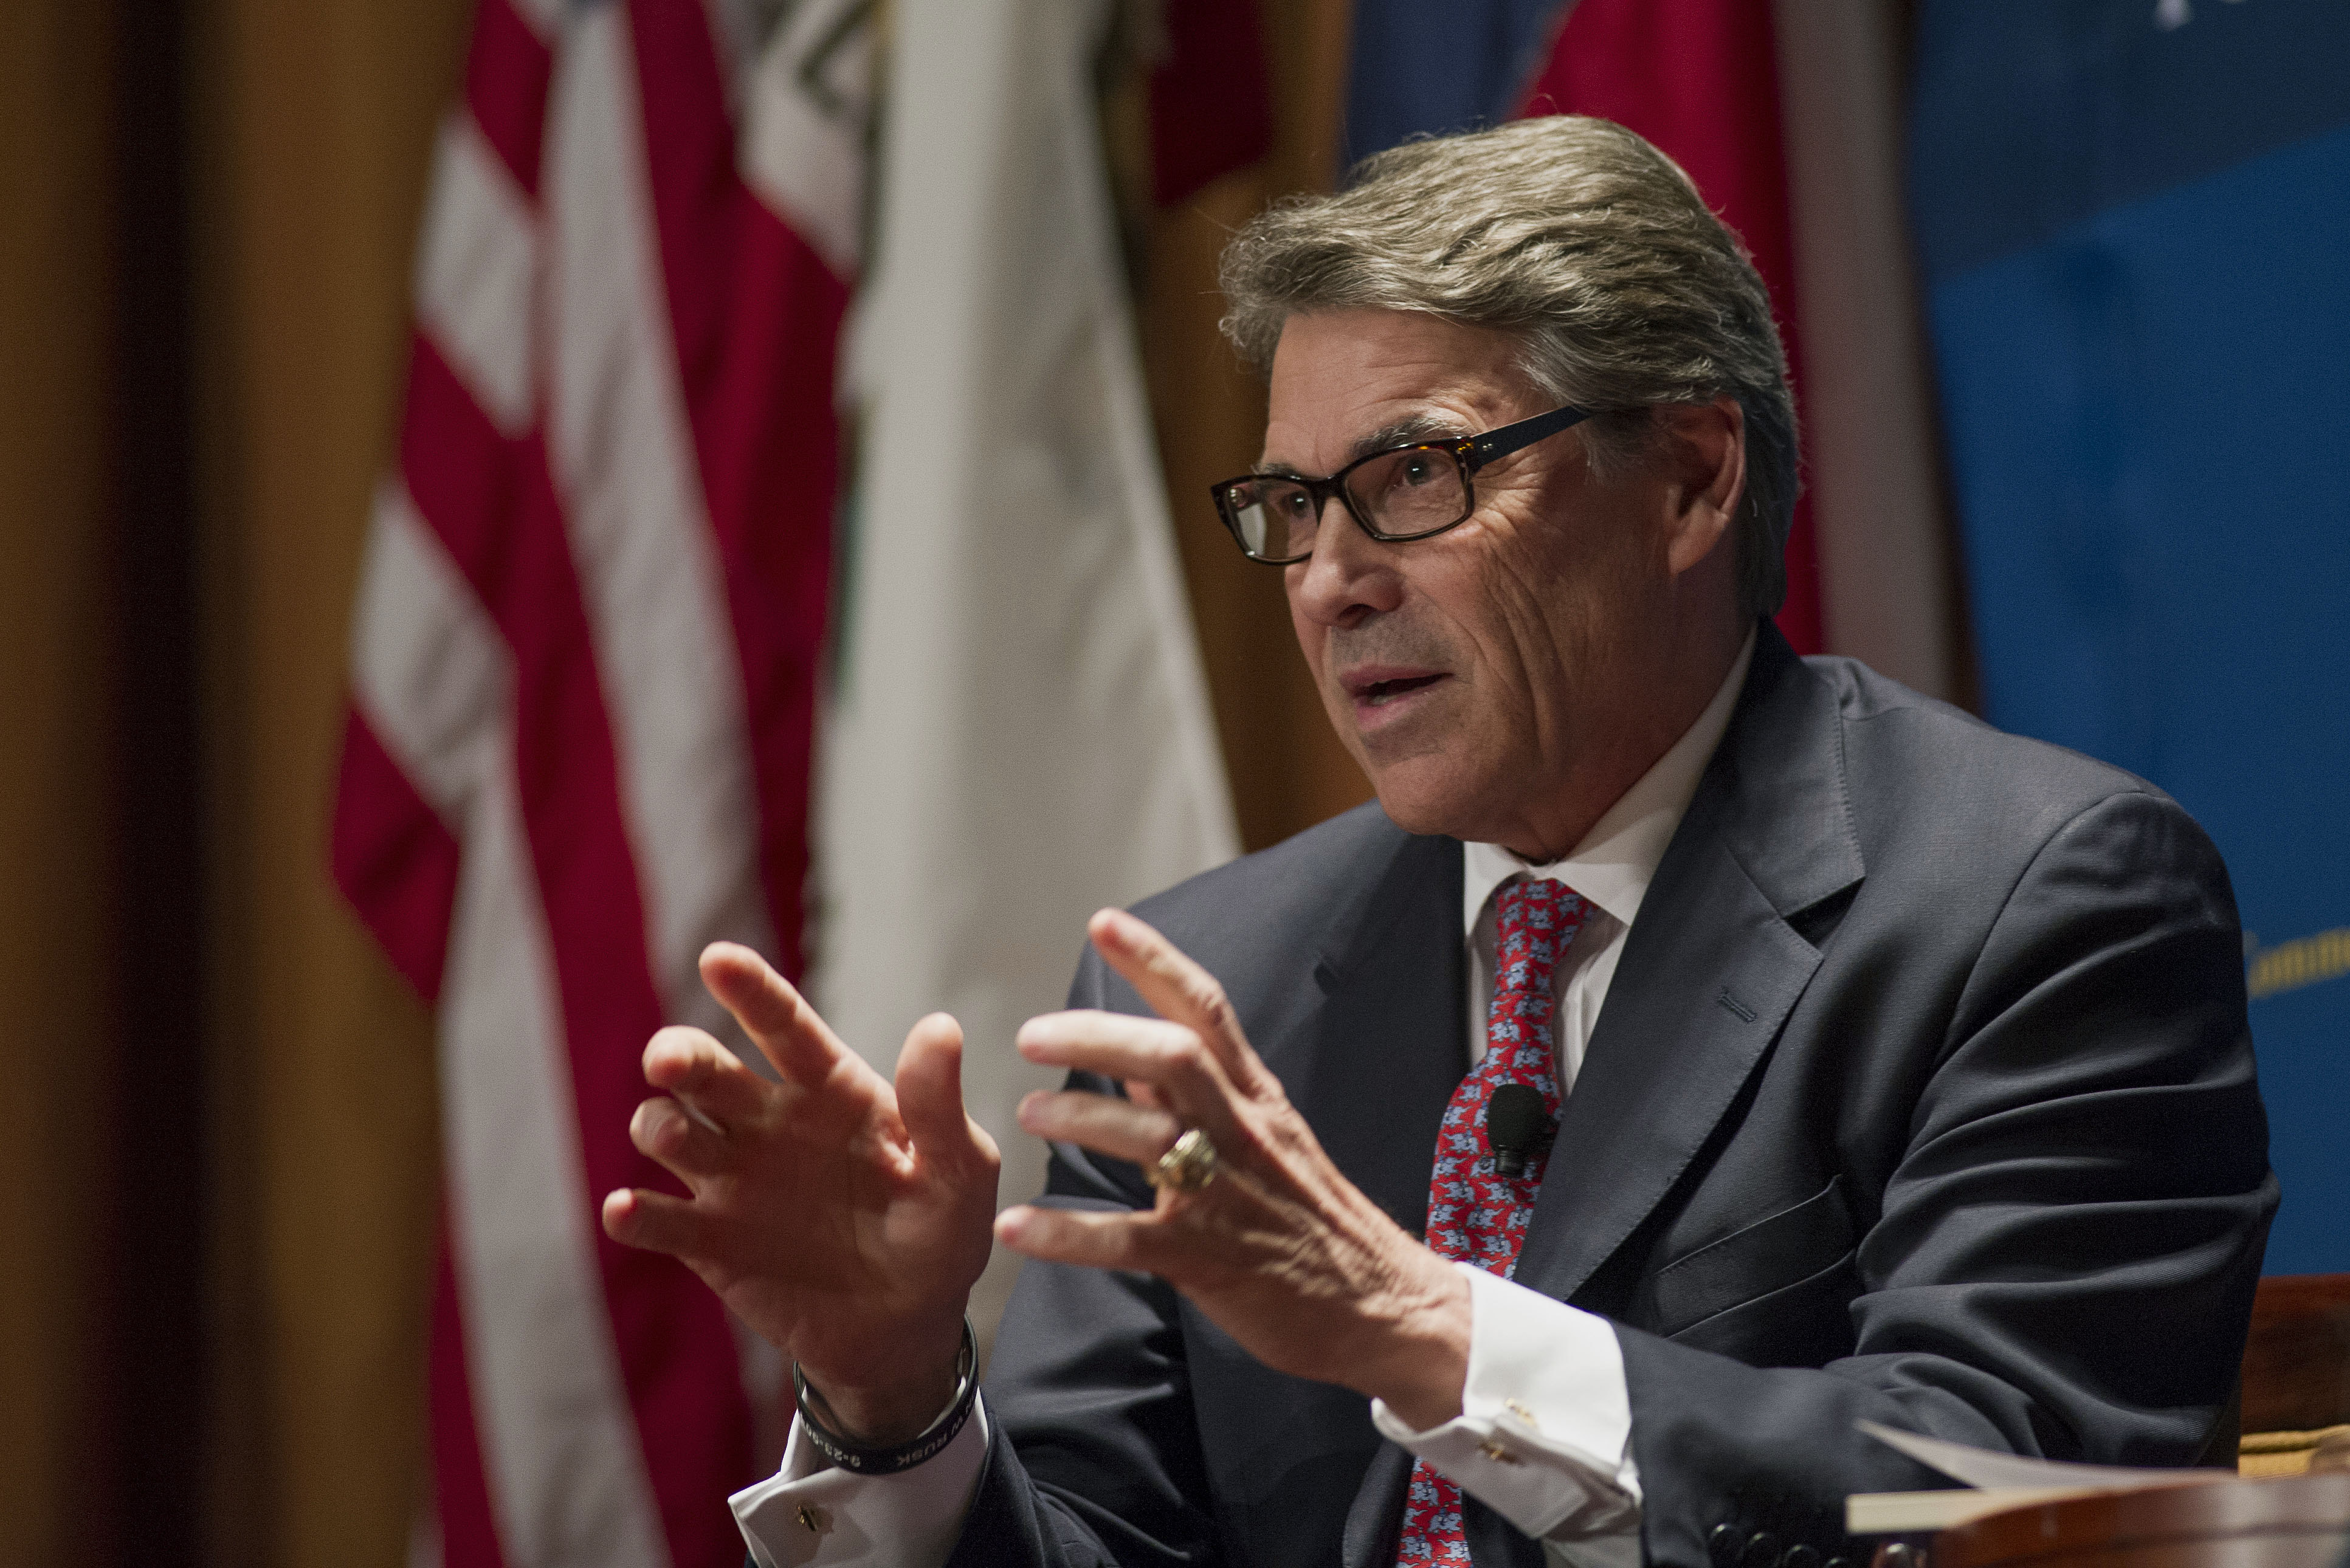 Rick Perry, governor of Texas, speaks at the Commonwealth Club of California in San Francisco on June 11, 2014. (David Paul Morris—Bloomberg/Getty Images)